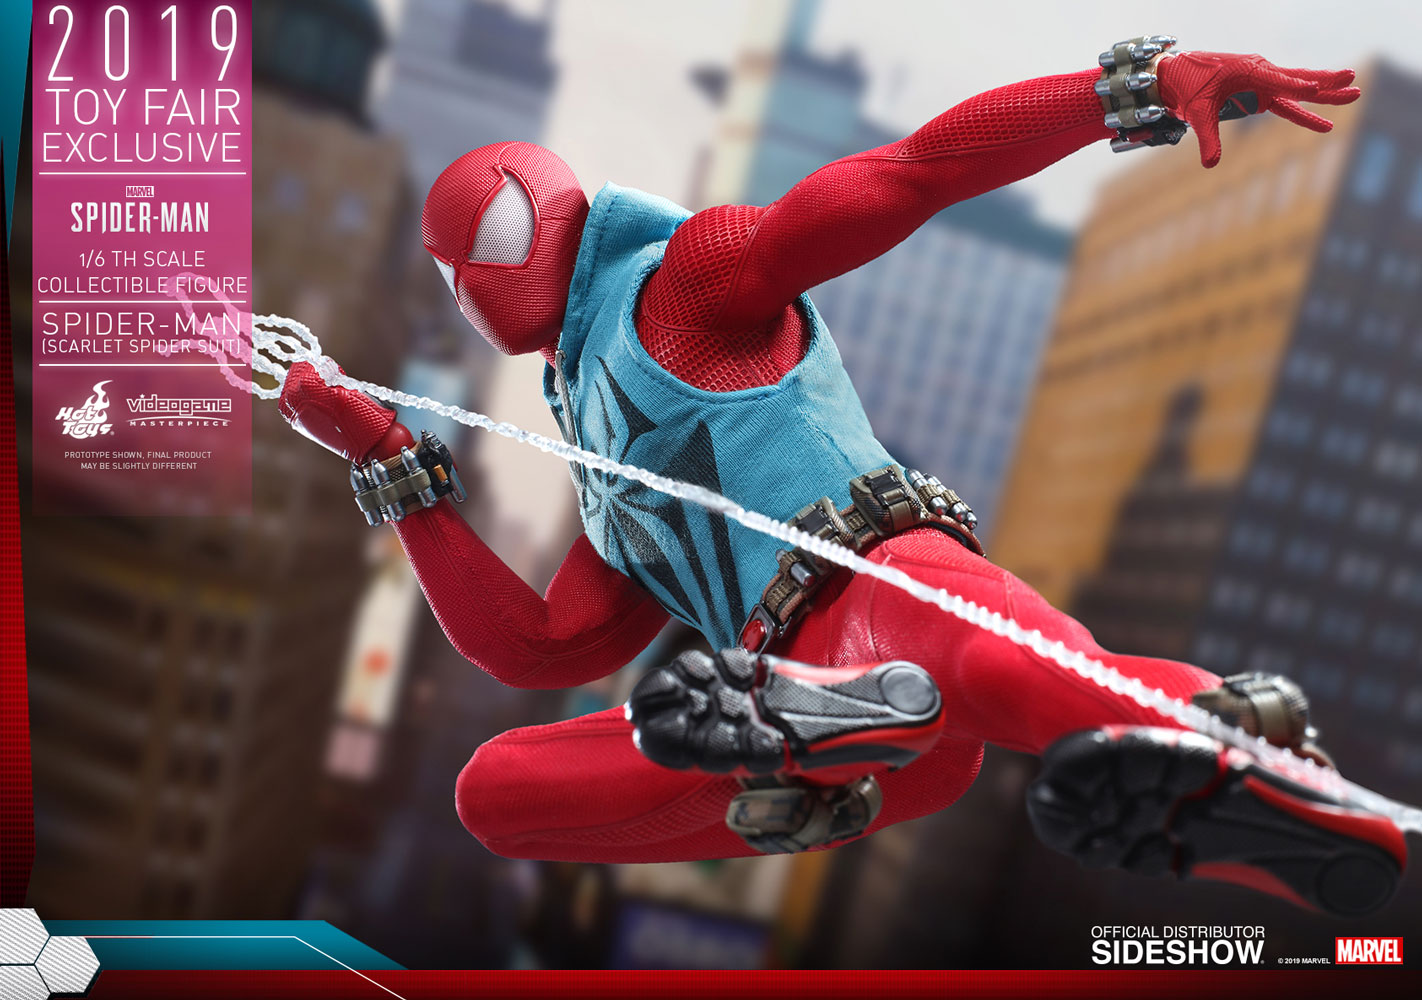 Spider-Man (Scarlet Spider Suit) Exclusive Edition (Prototype Shown) View 16